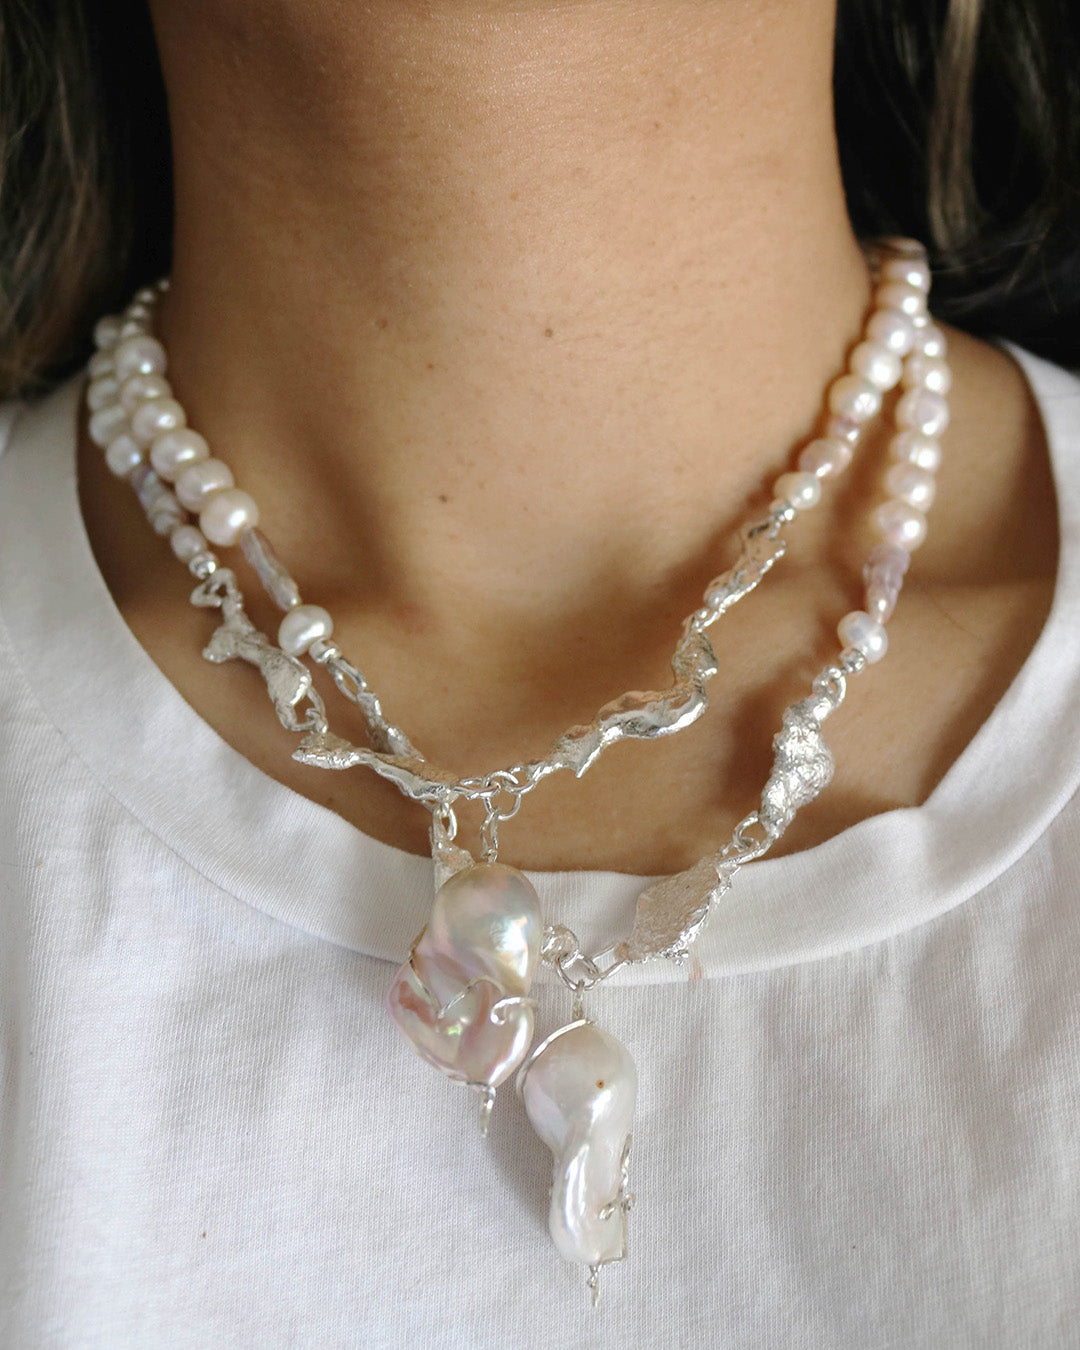 Darling Silver Necklace - White